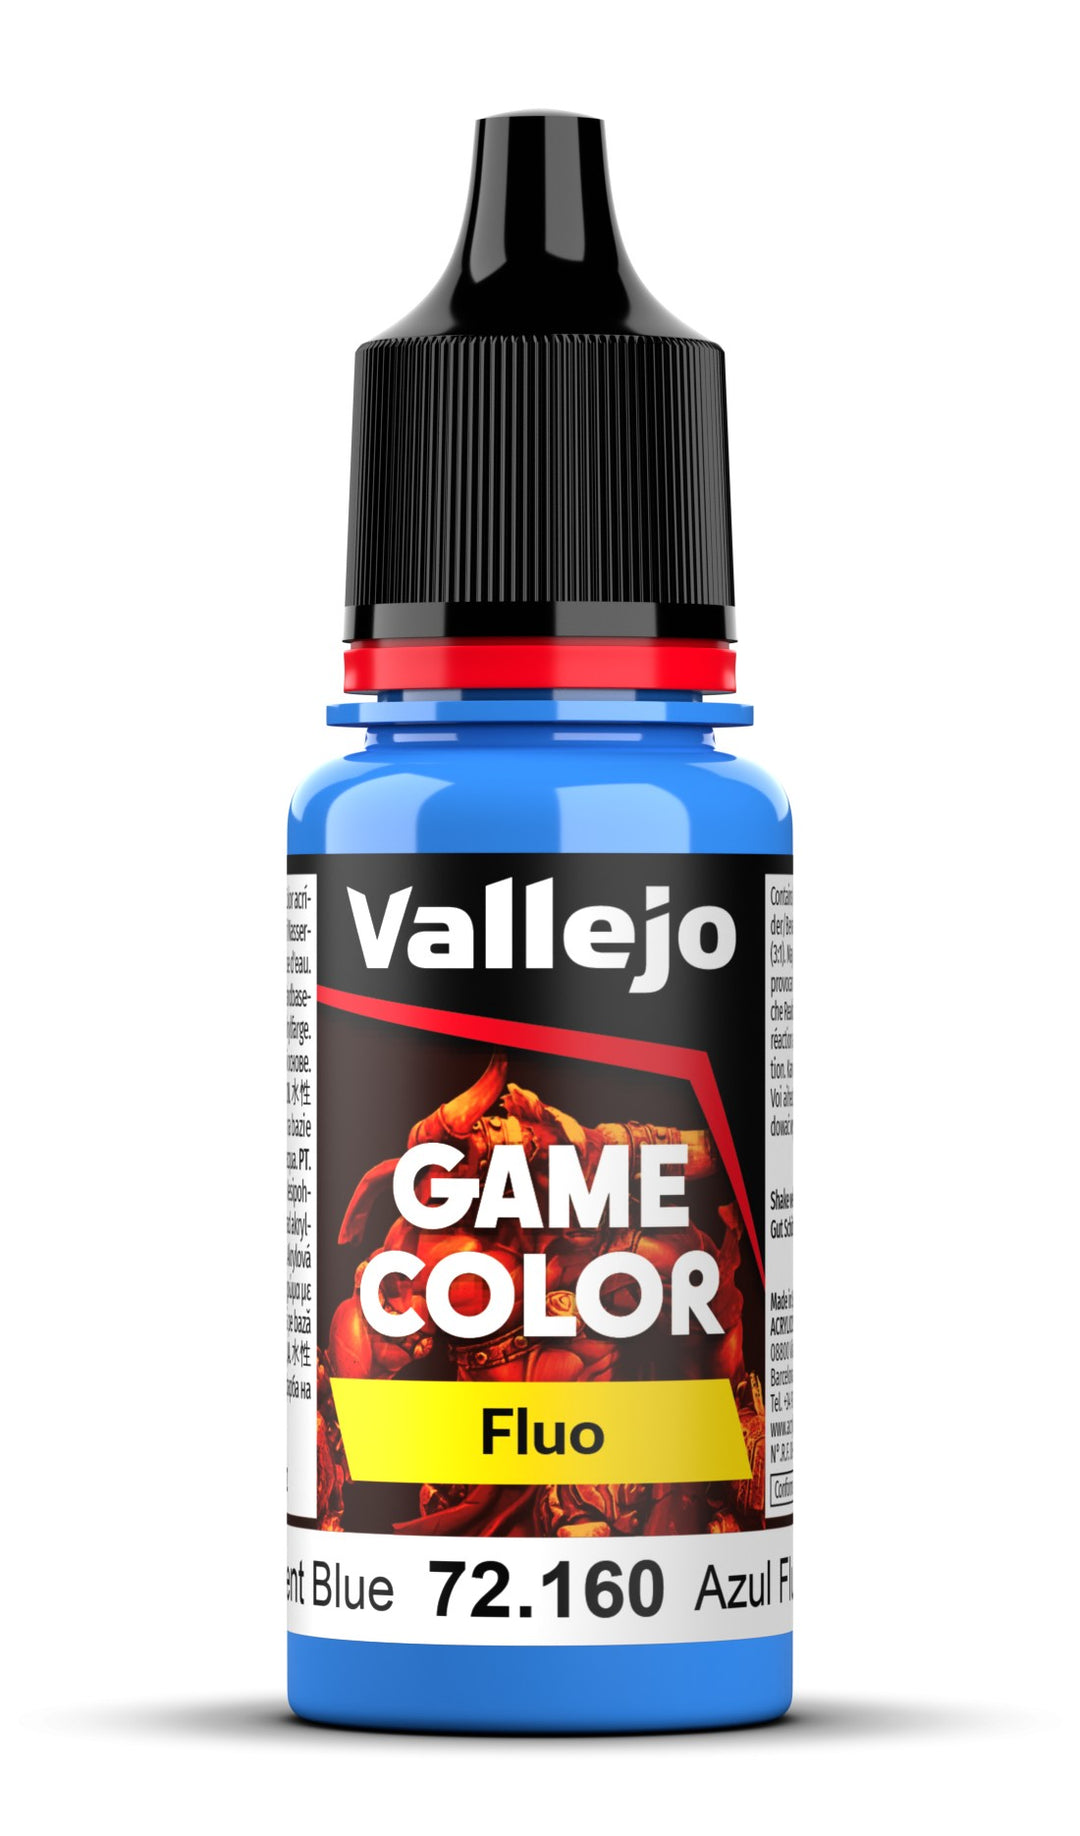 Vallejo Game Color - Fluorescent Turquoise 18 ml - Game Fluo